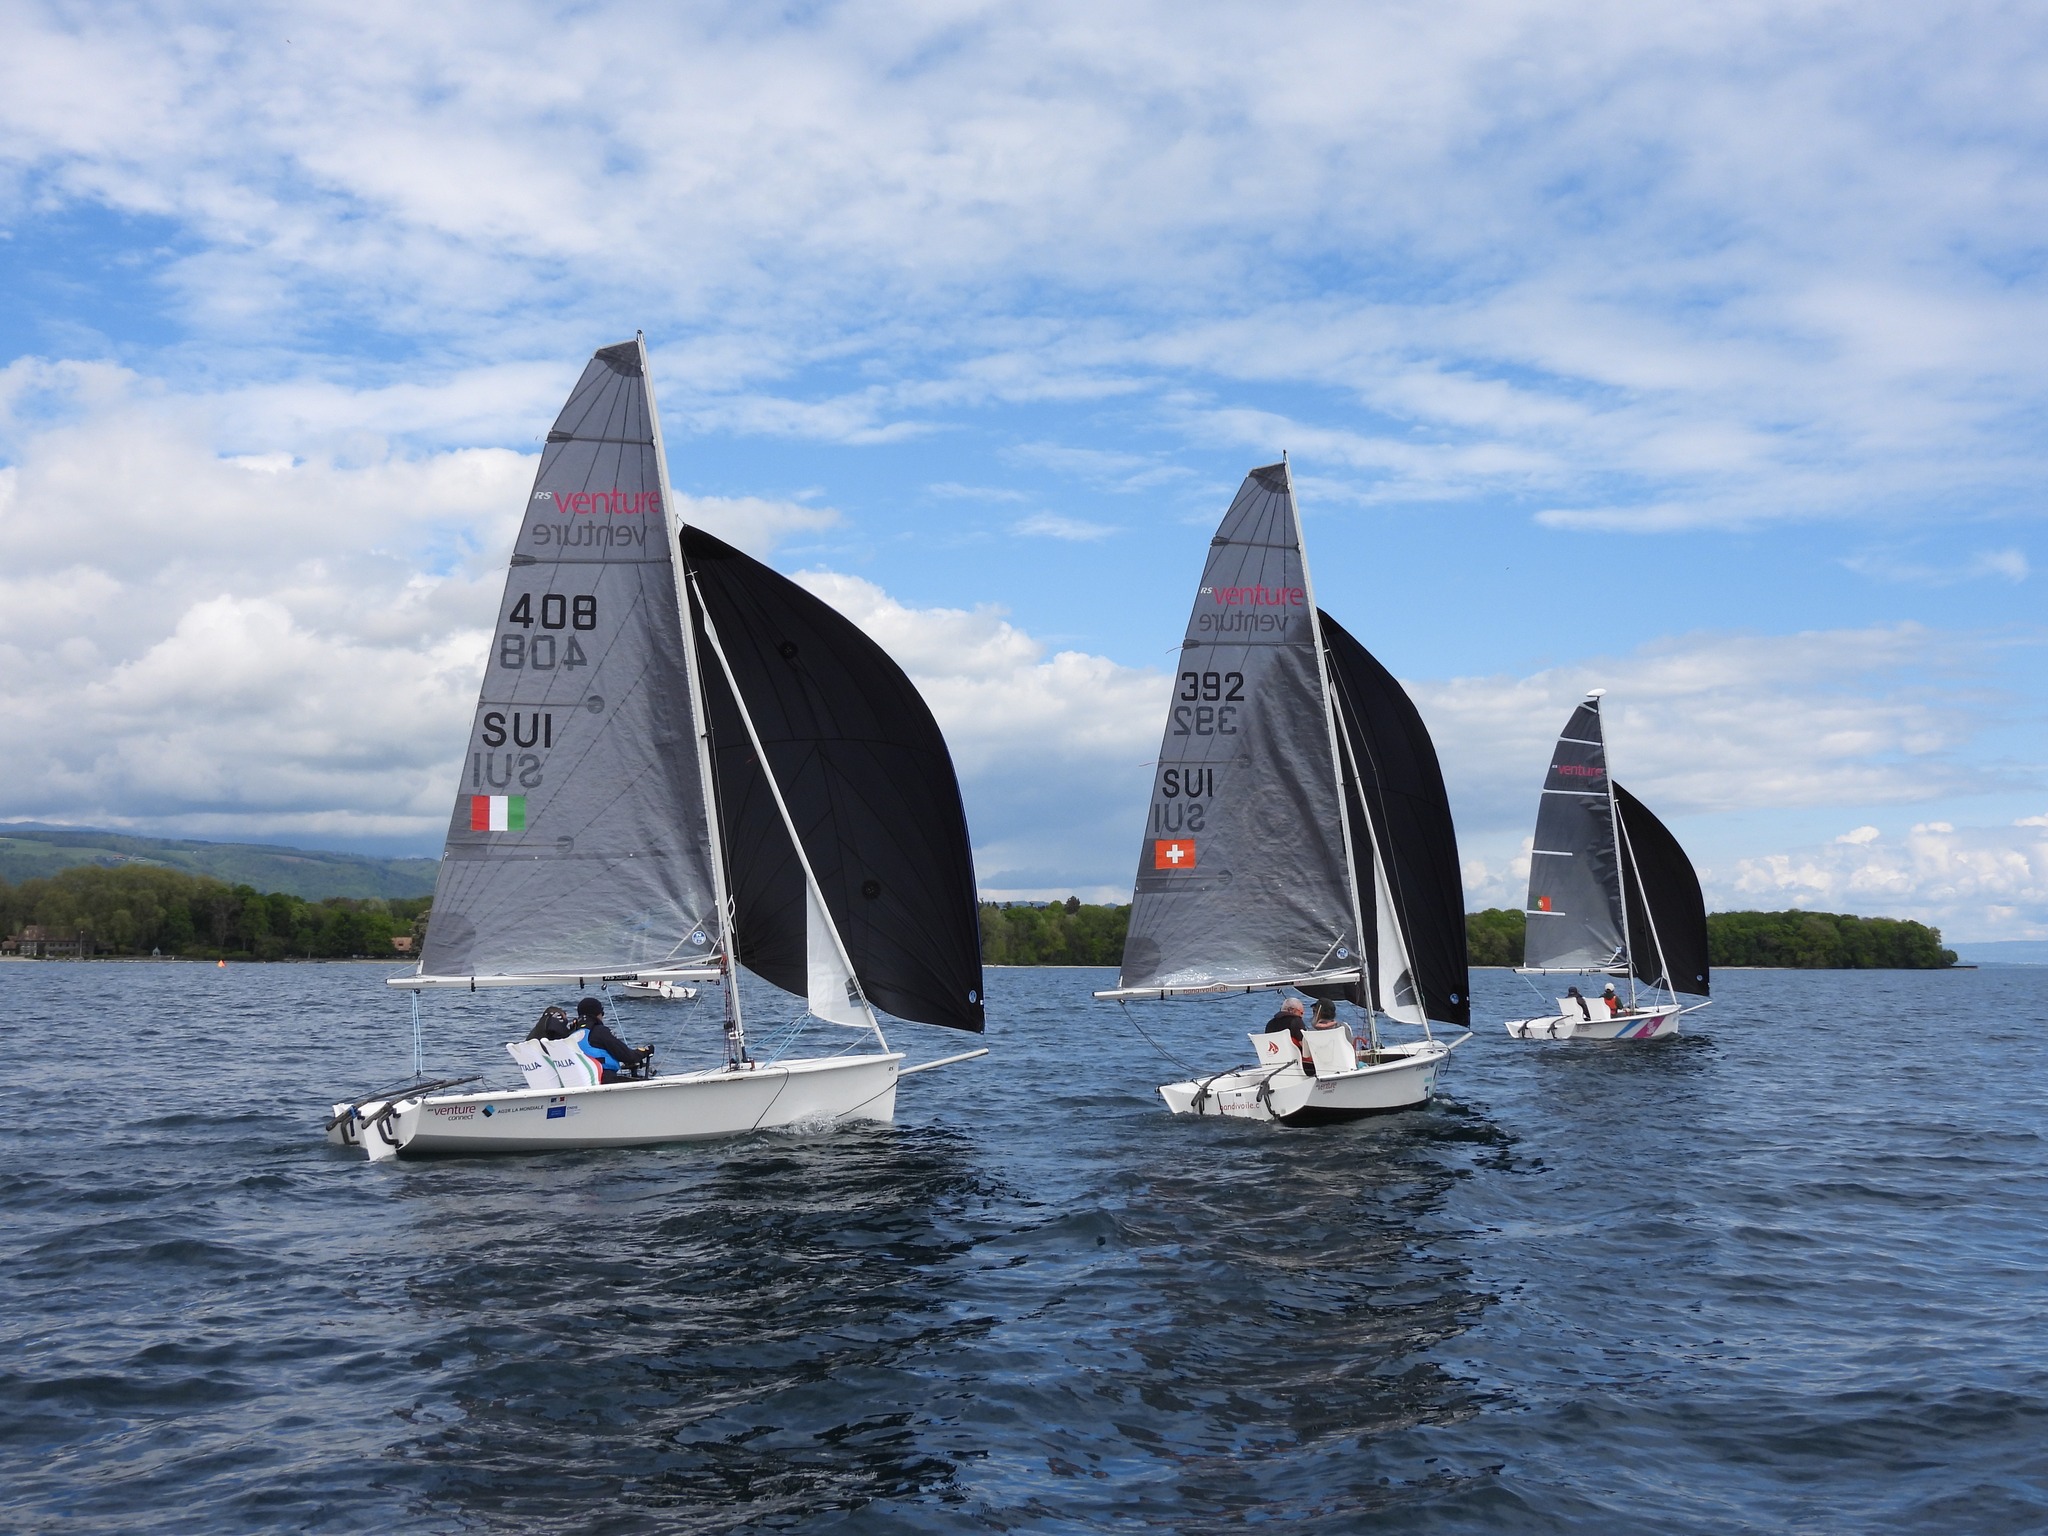  RS Venture  Swiss Inclusive Cup  CV Prangins  Day 2